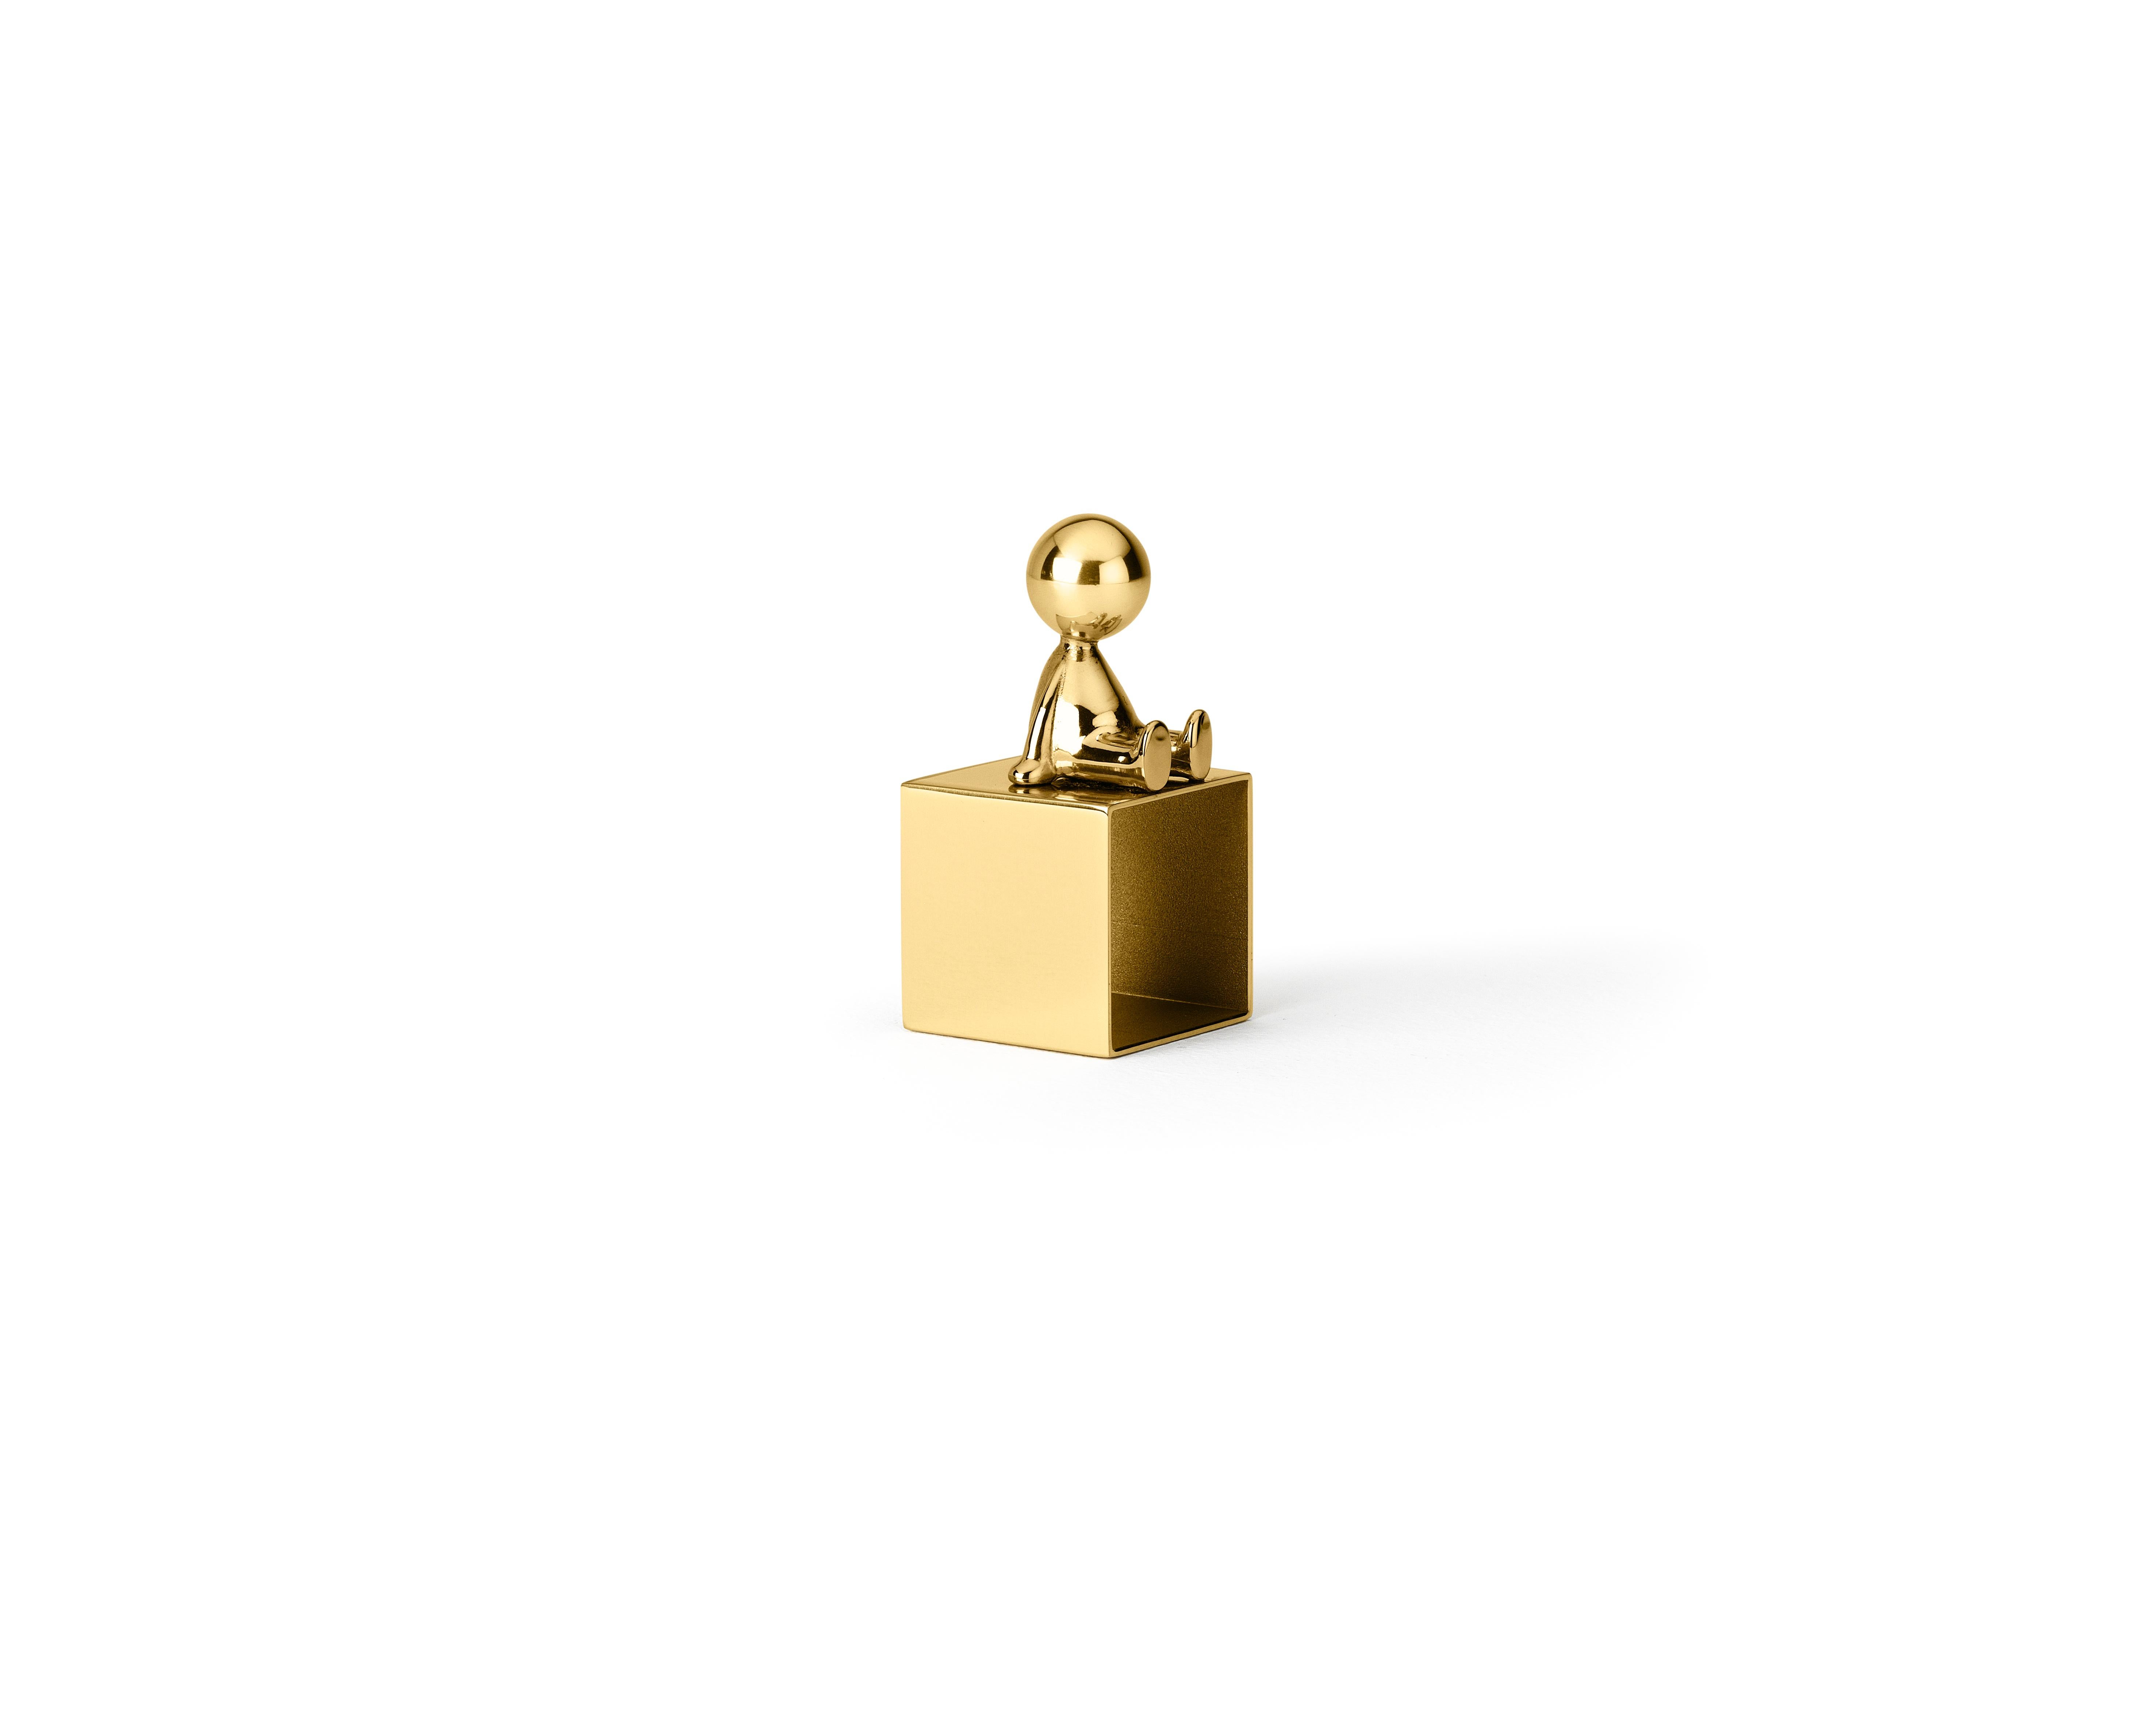 Napkin holder in brass
Omini is a family of products that plays on the inclusion and the relationship between the human figure with a series of monolithic objects from geometric and Minimalist design. Small Lilliputians attack and animate the pure